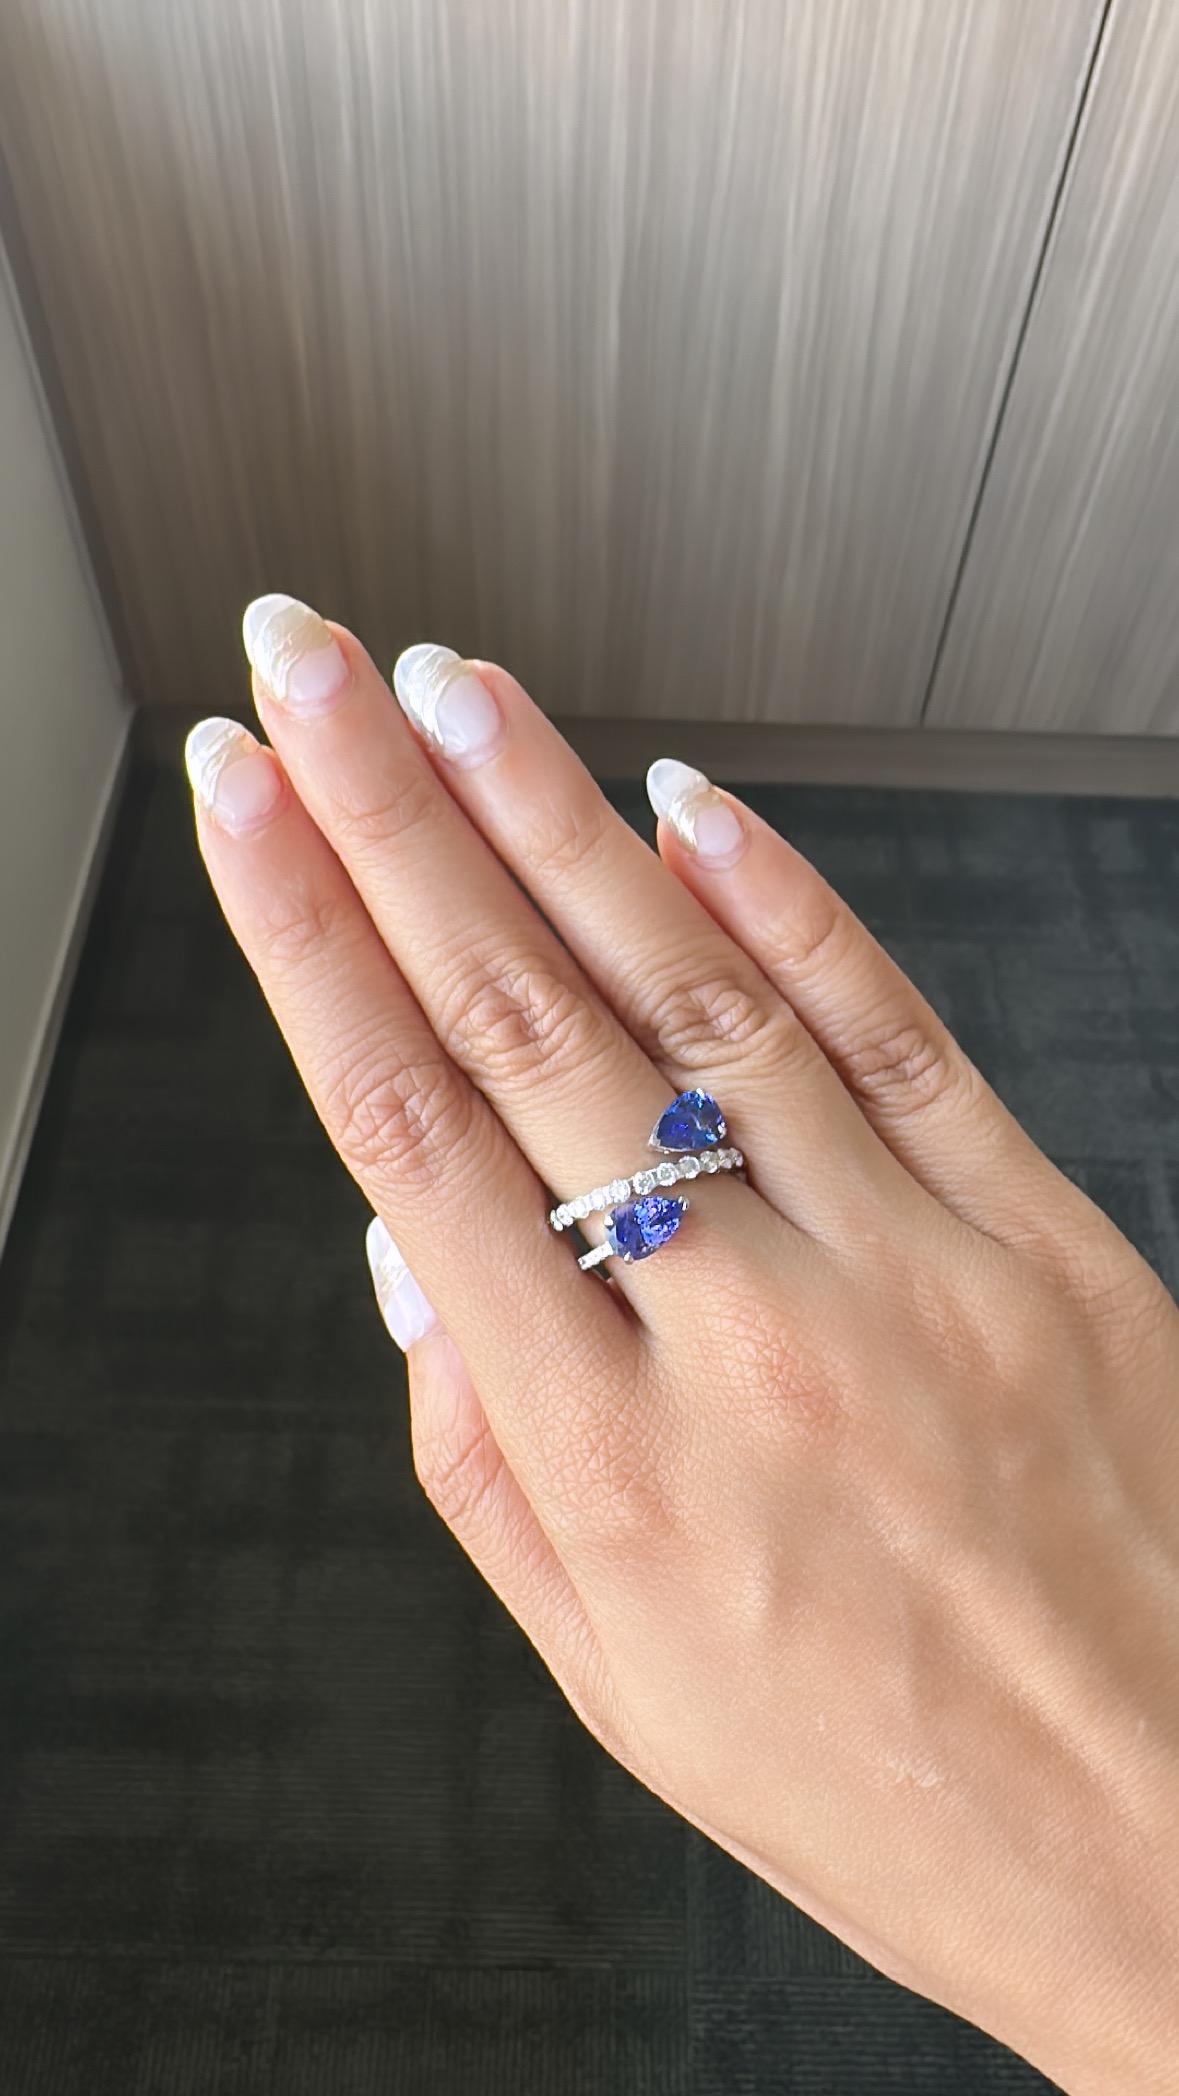 A very gorgeous and beautiful, Tanzanite Band / Wedding Ring set in 18K White Gold & Diamonds. The weight of the pear shaped Tanzanites is 3.11 carats. The Tanzanites are natural and responsibly sourced from Tanzania. The Diamonds weight is 0.89